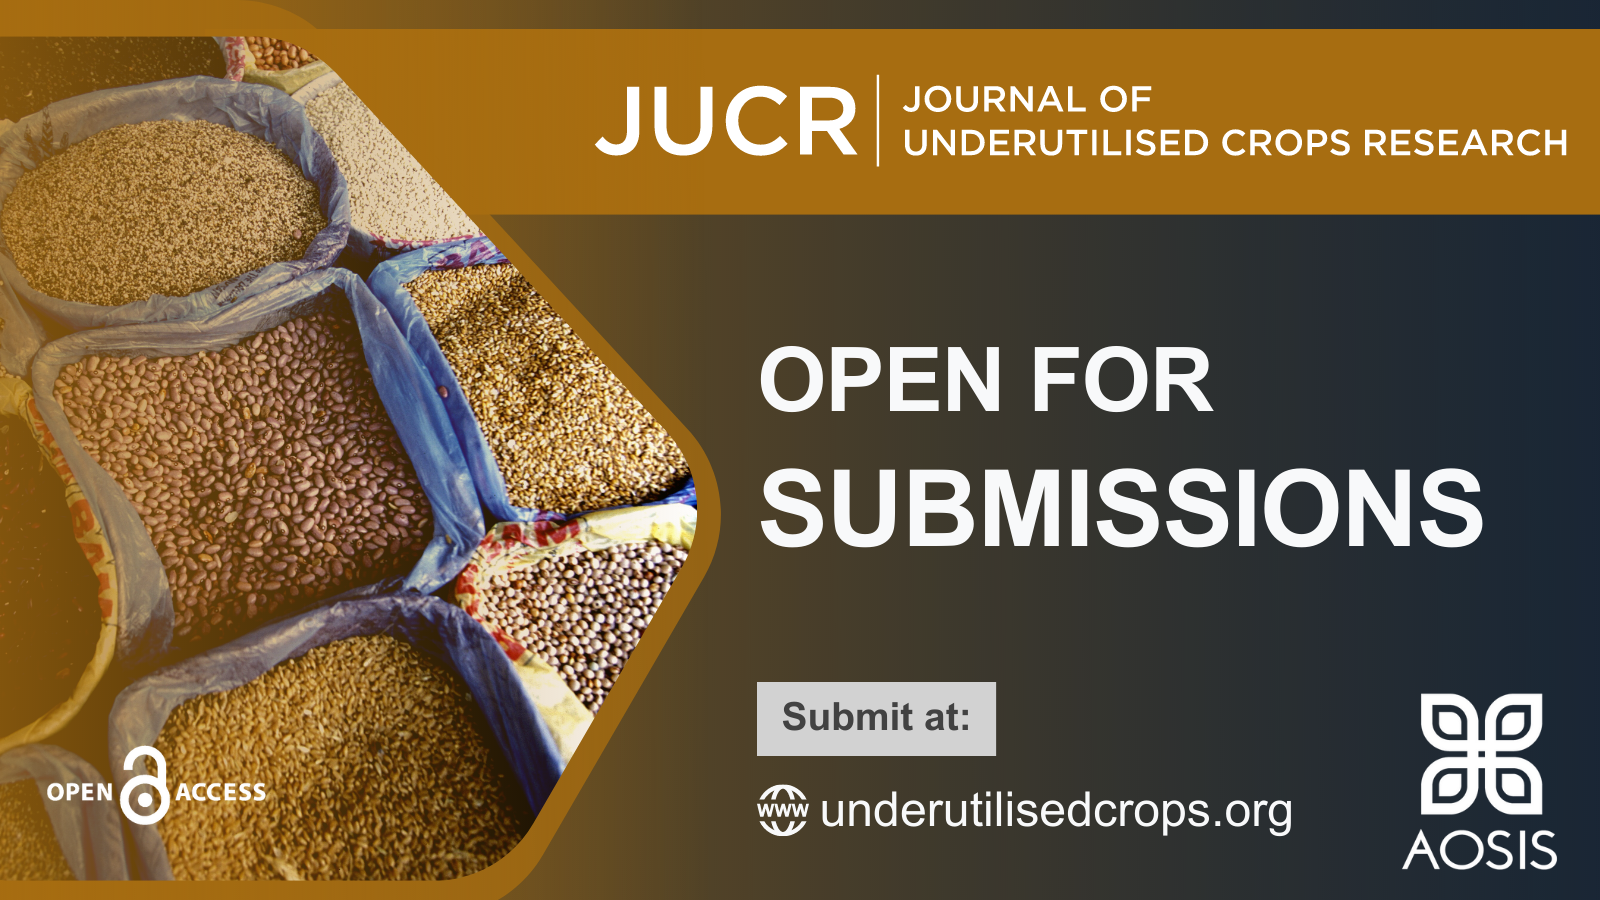 The Journal of Underutilised Crops Research now open for submissions